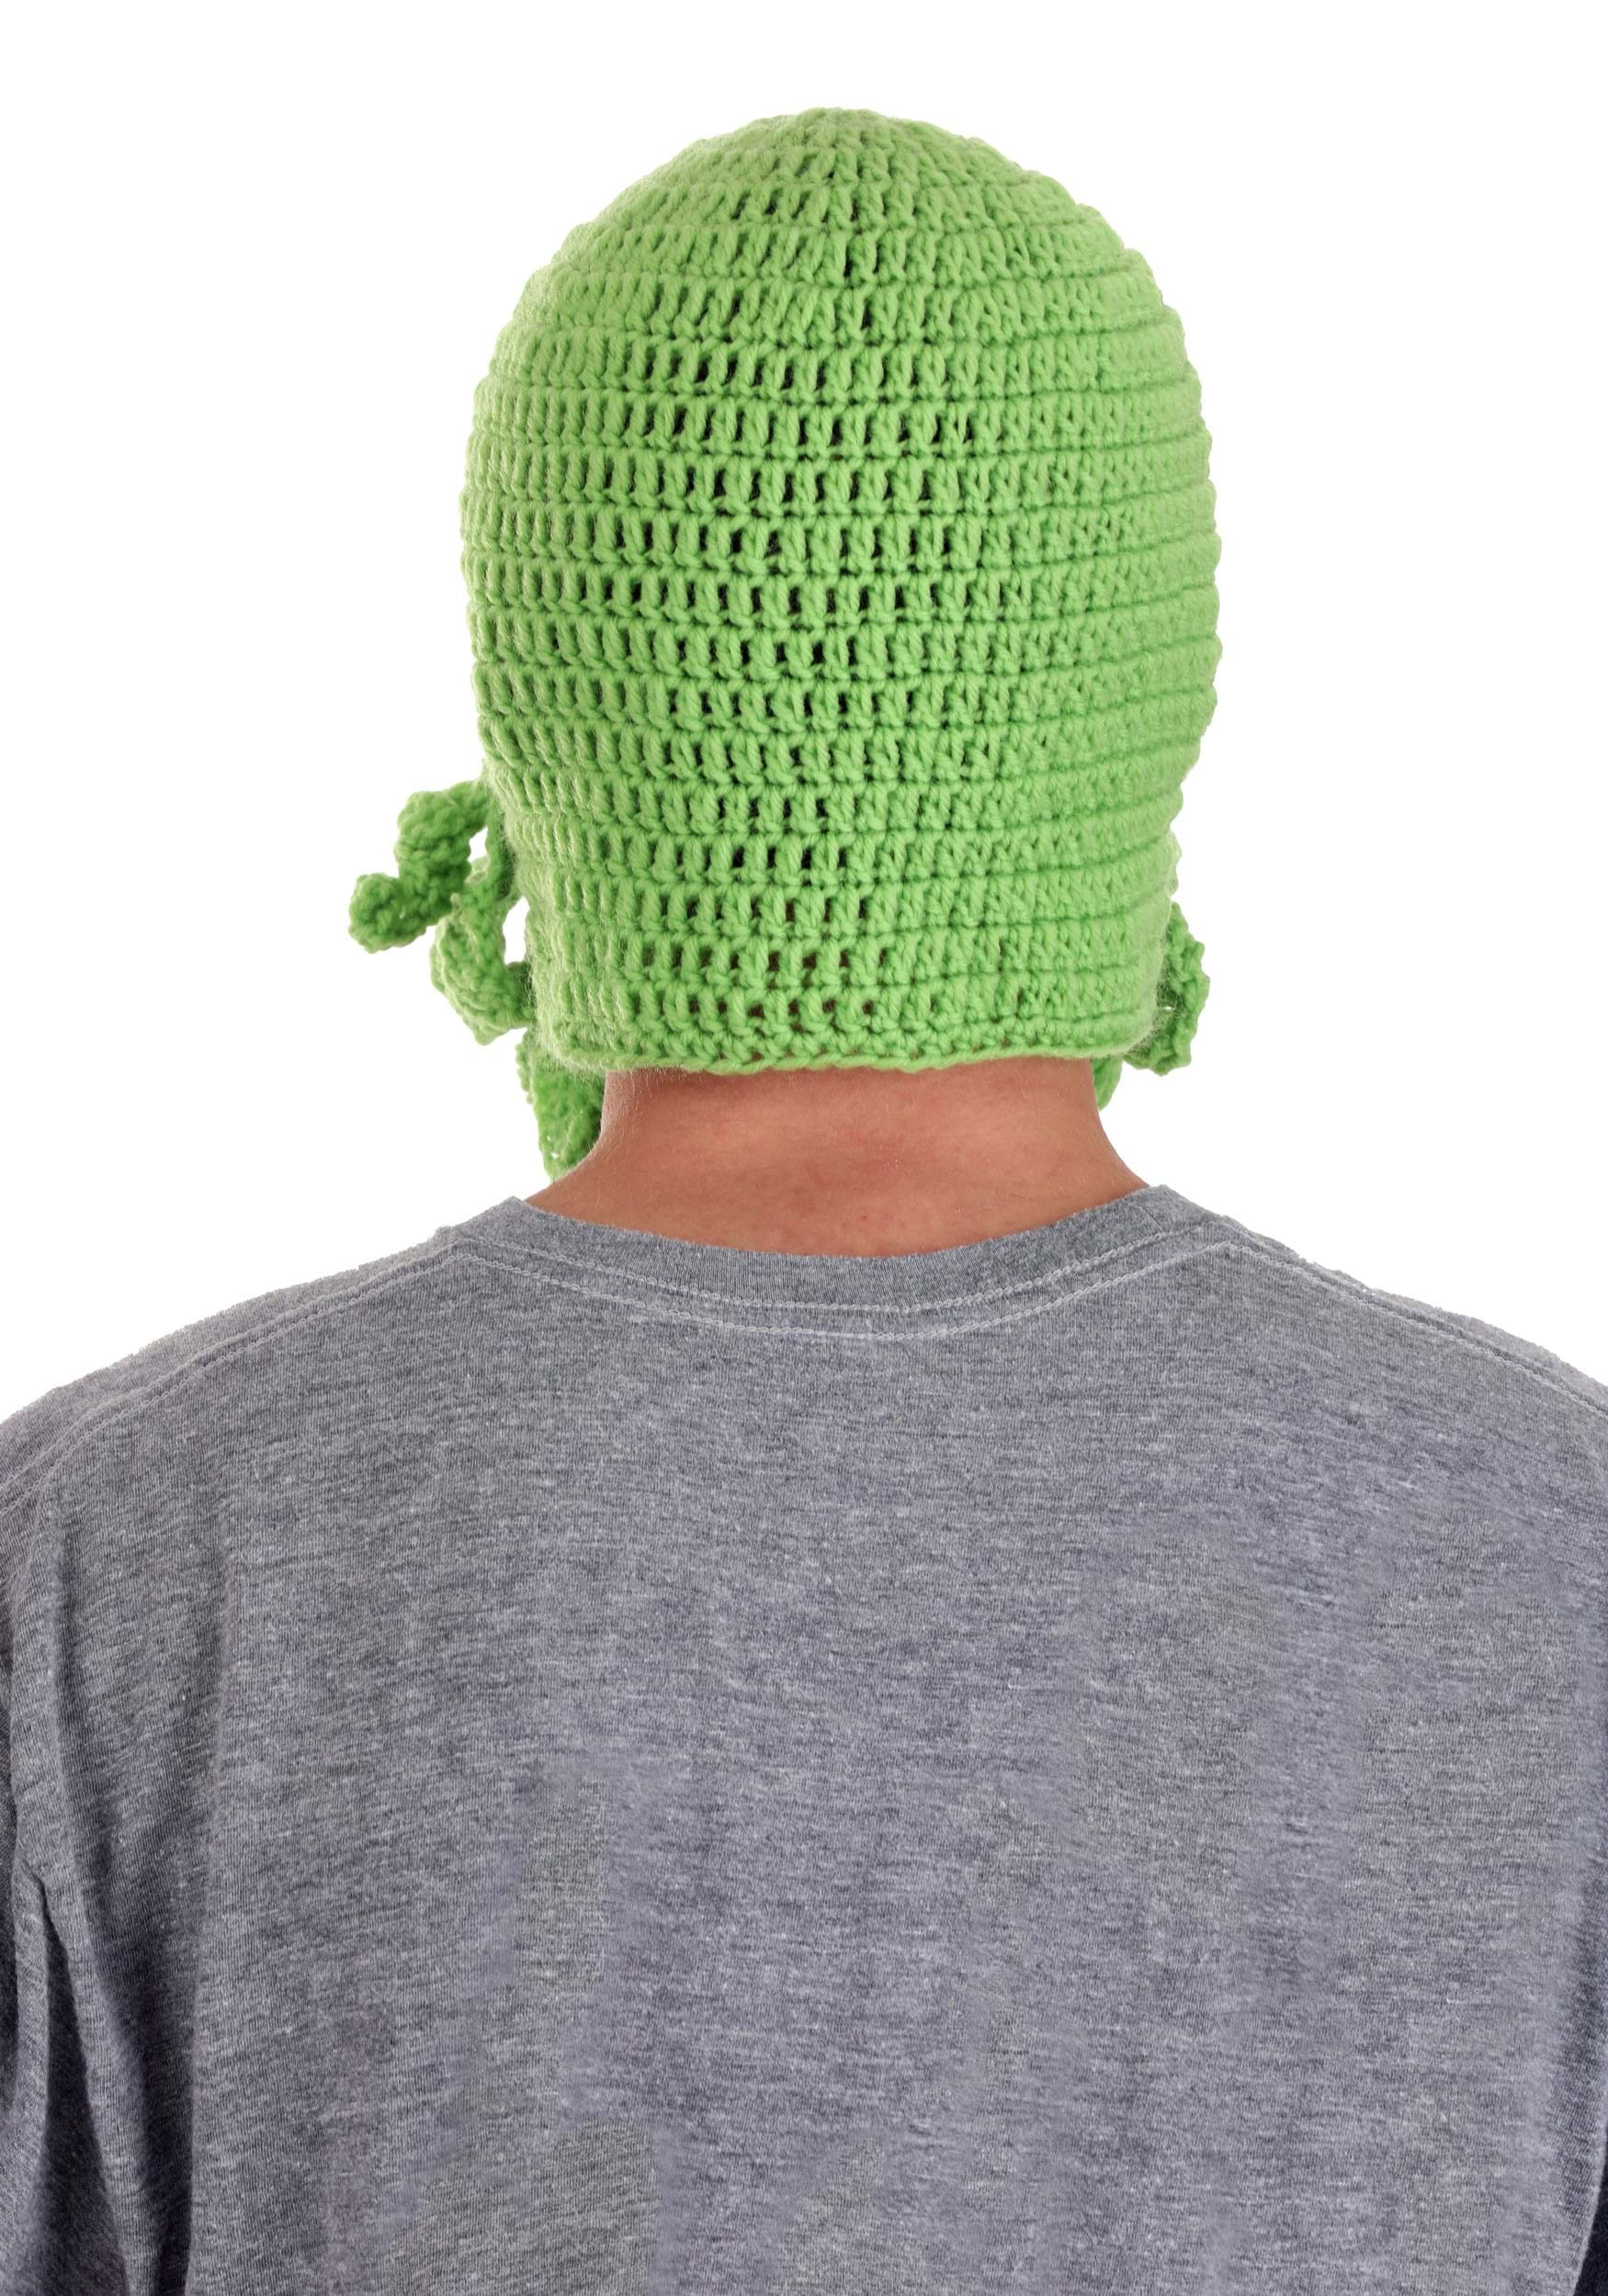 Adult Green Cthulhu Beanie , Monster Costume Accessories